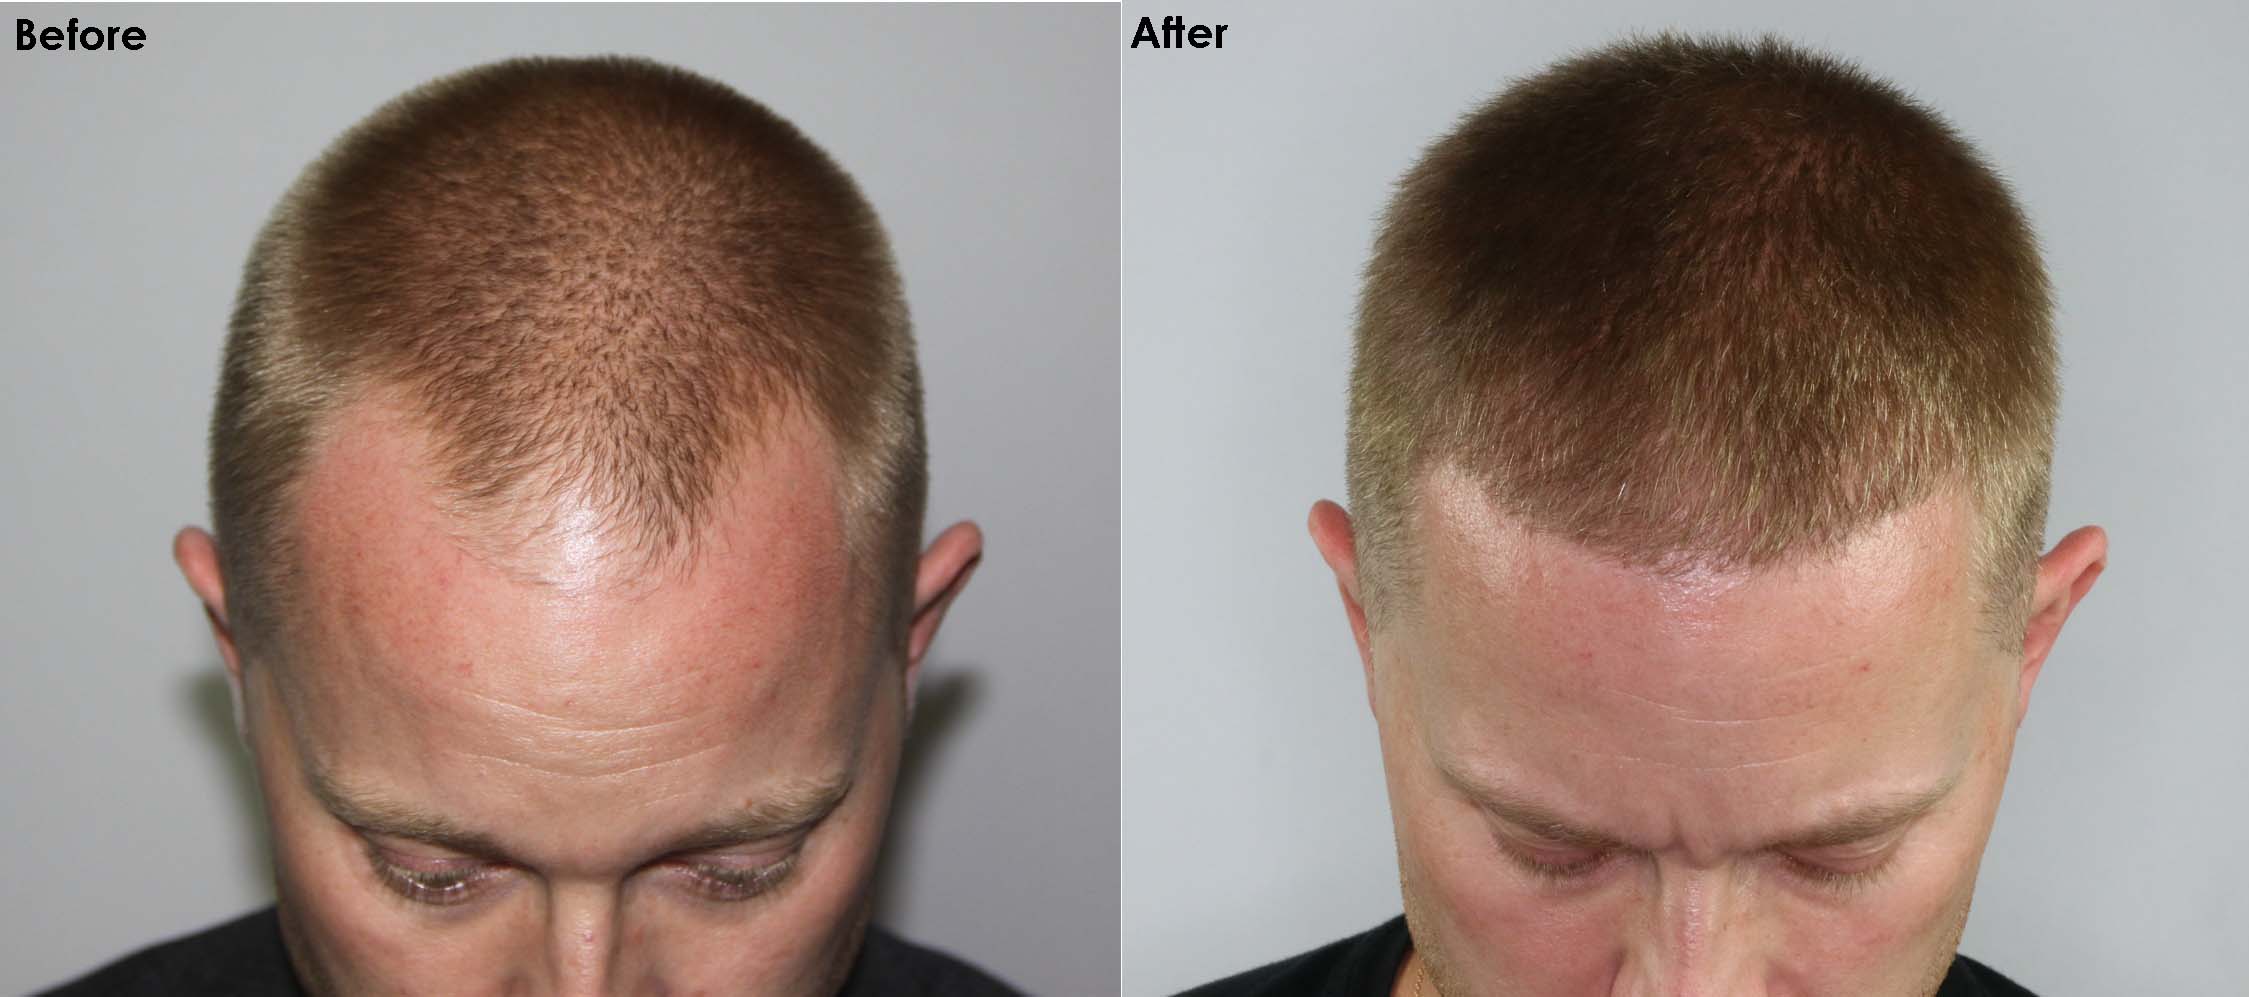 Case Study - Can I Wear My Hair Short After A Hair Transplant? - AlviArmani  - Hair Transplant Los Angeles